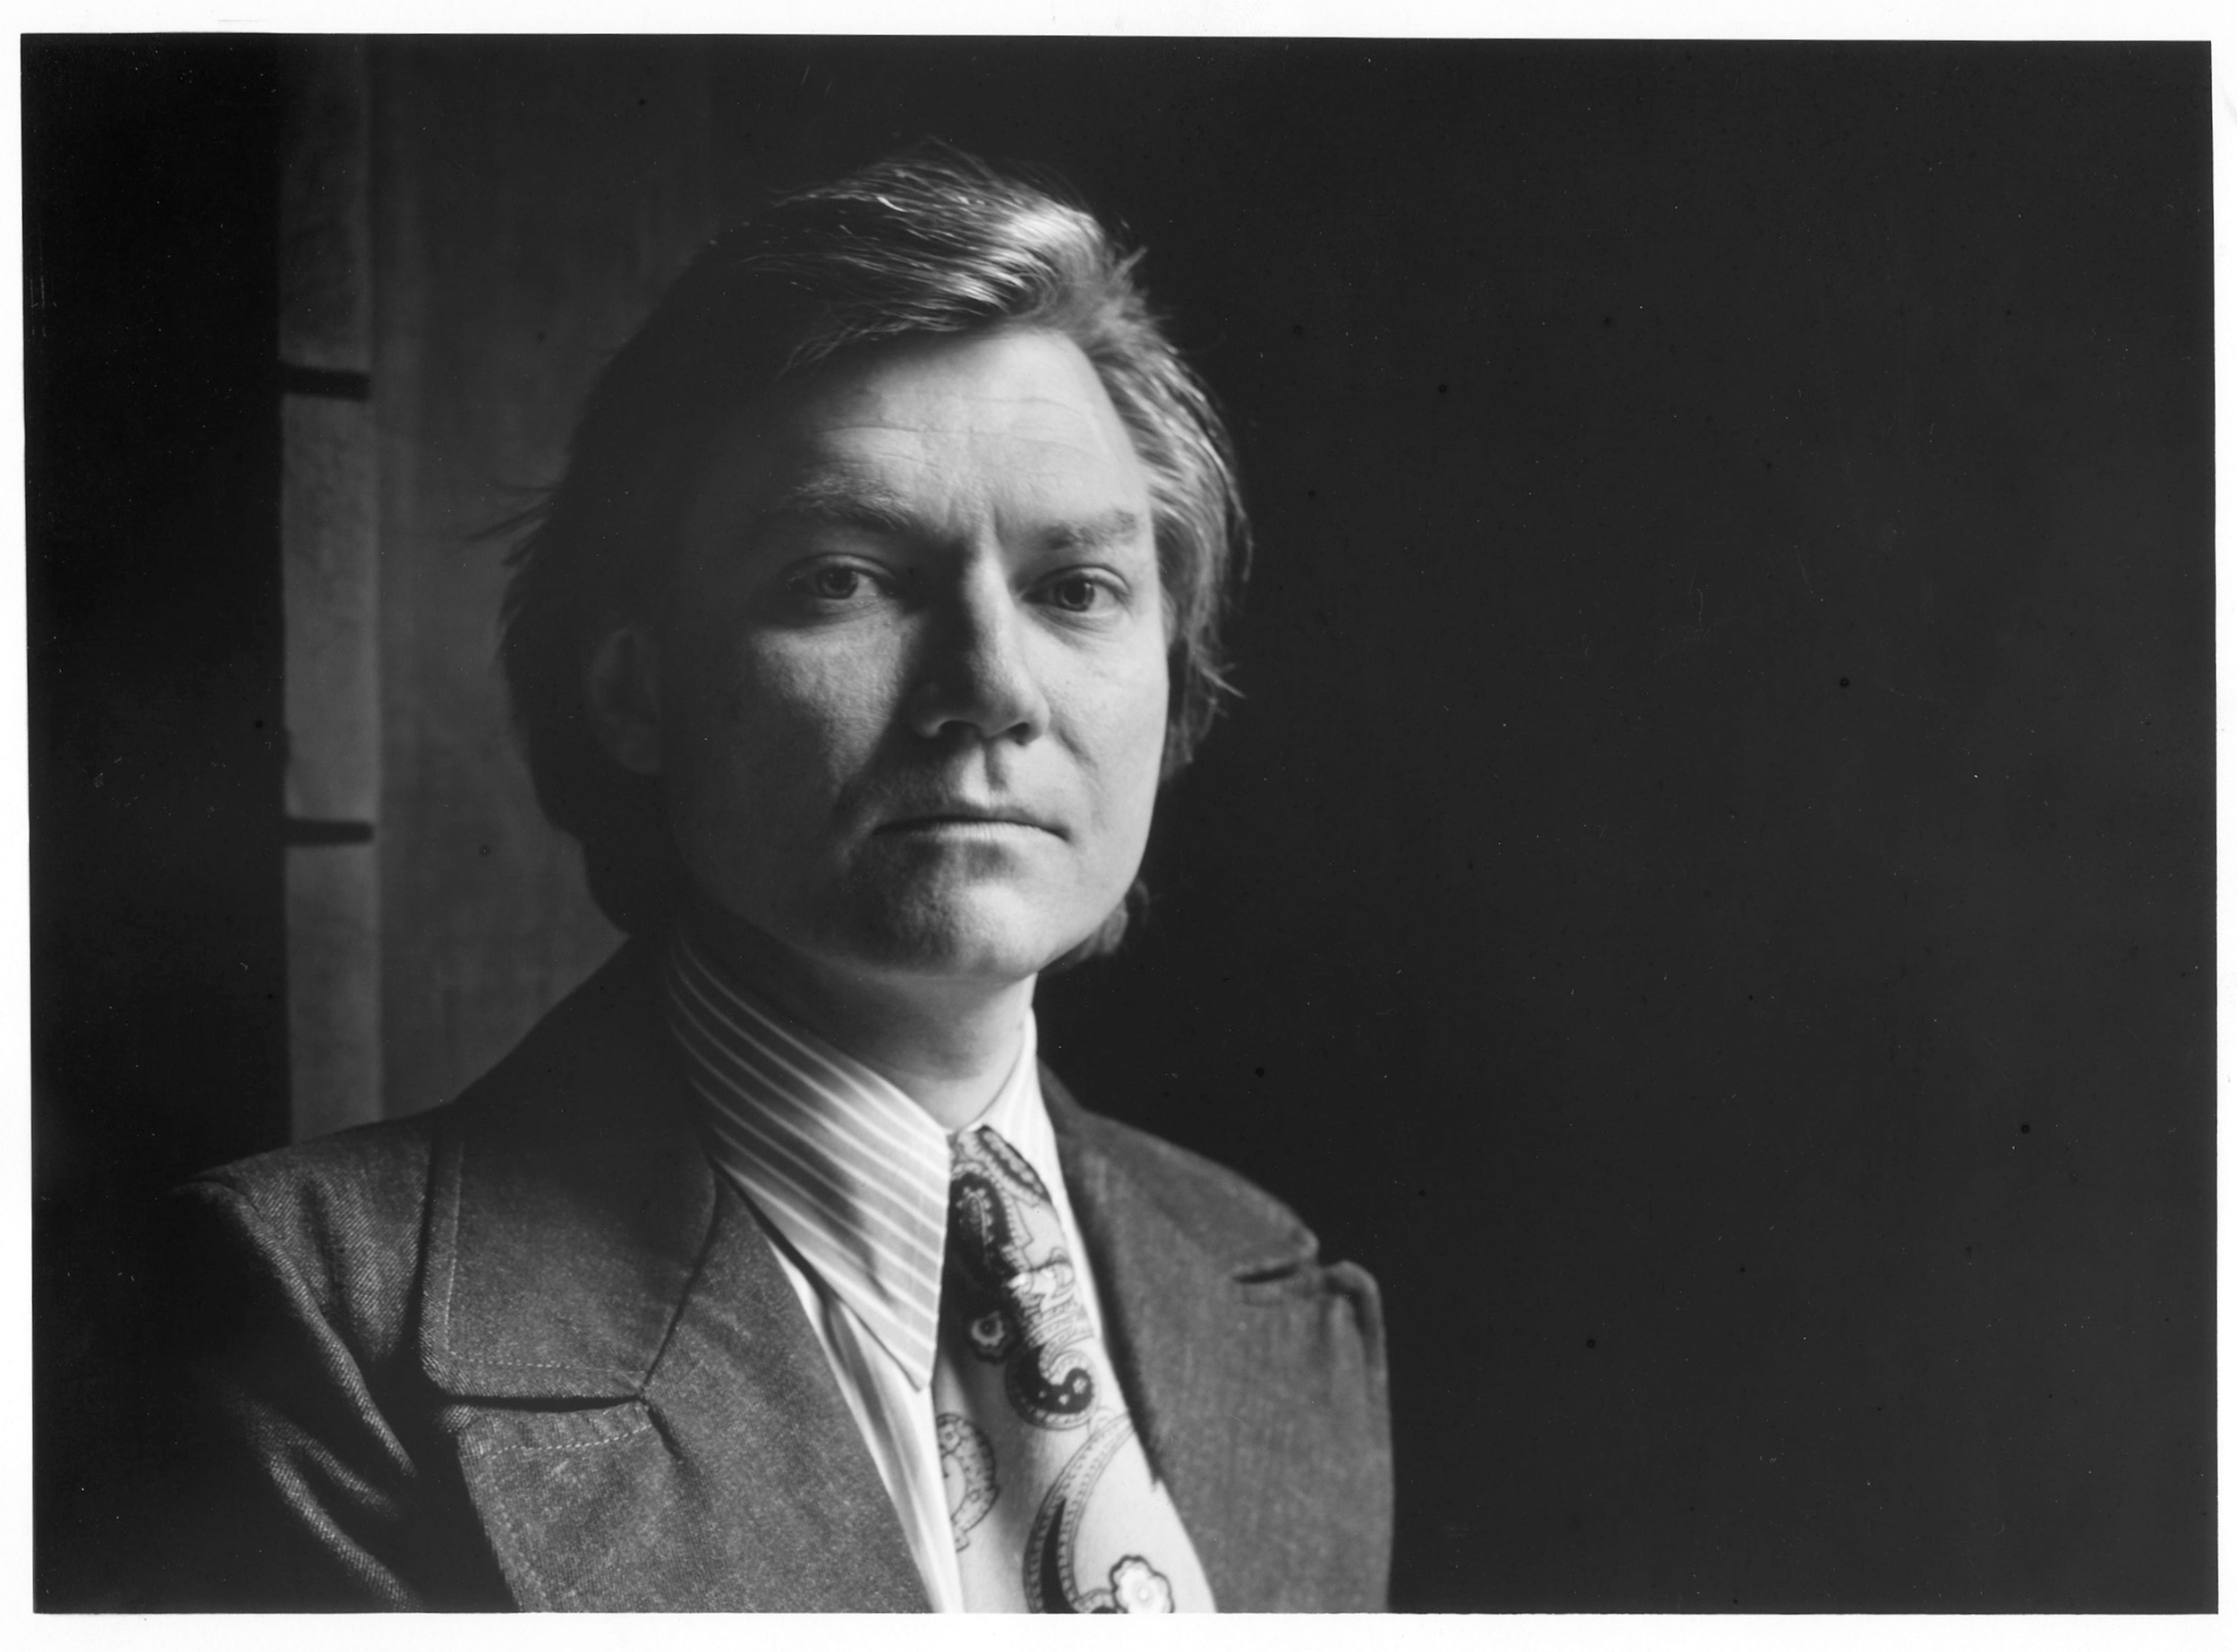  RISD's official portrait of John Udvardy when he was hired and appointed the new chairman of the Freshman Foundation Division and Director of the Summer Transfer Program. June 1973. 